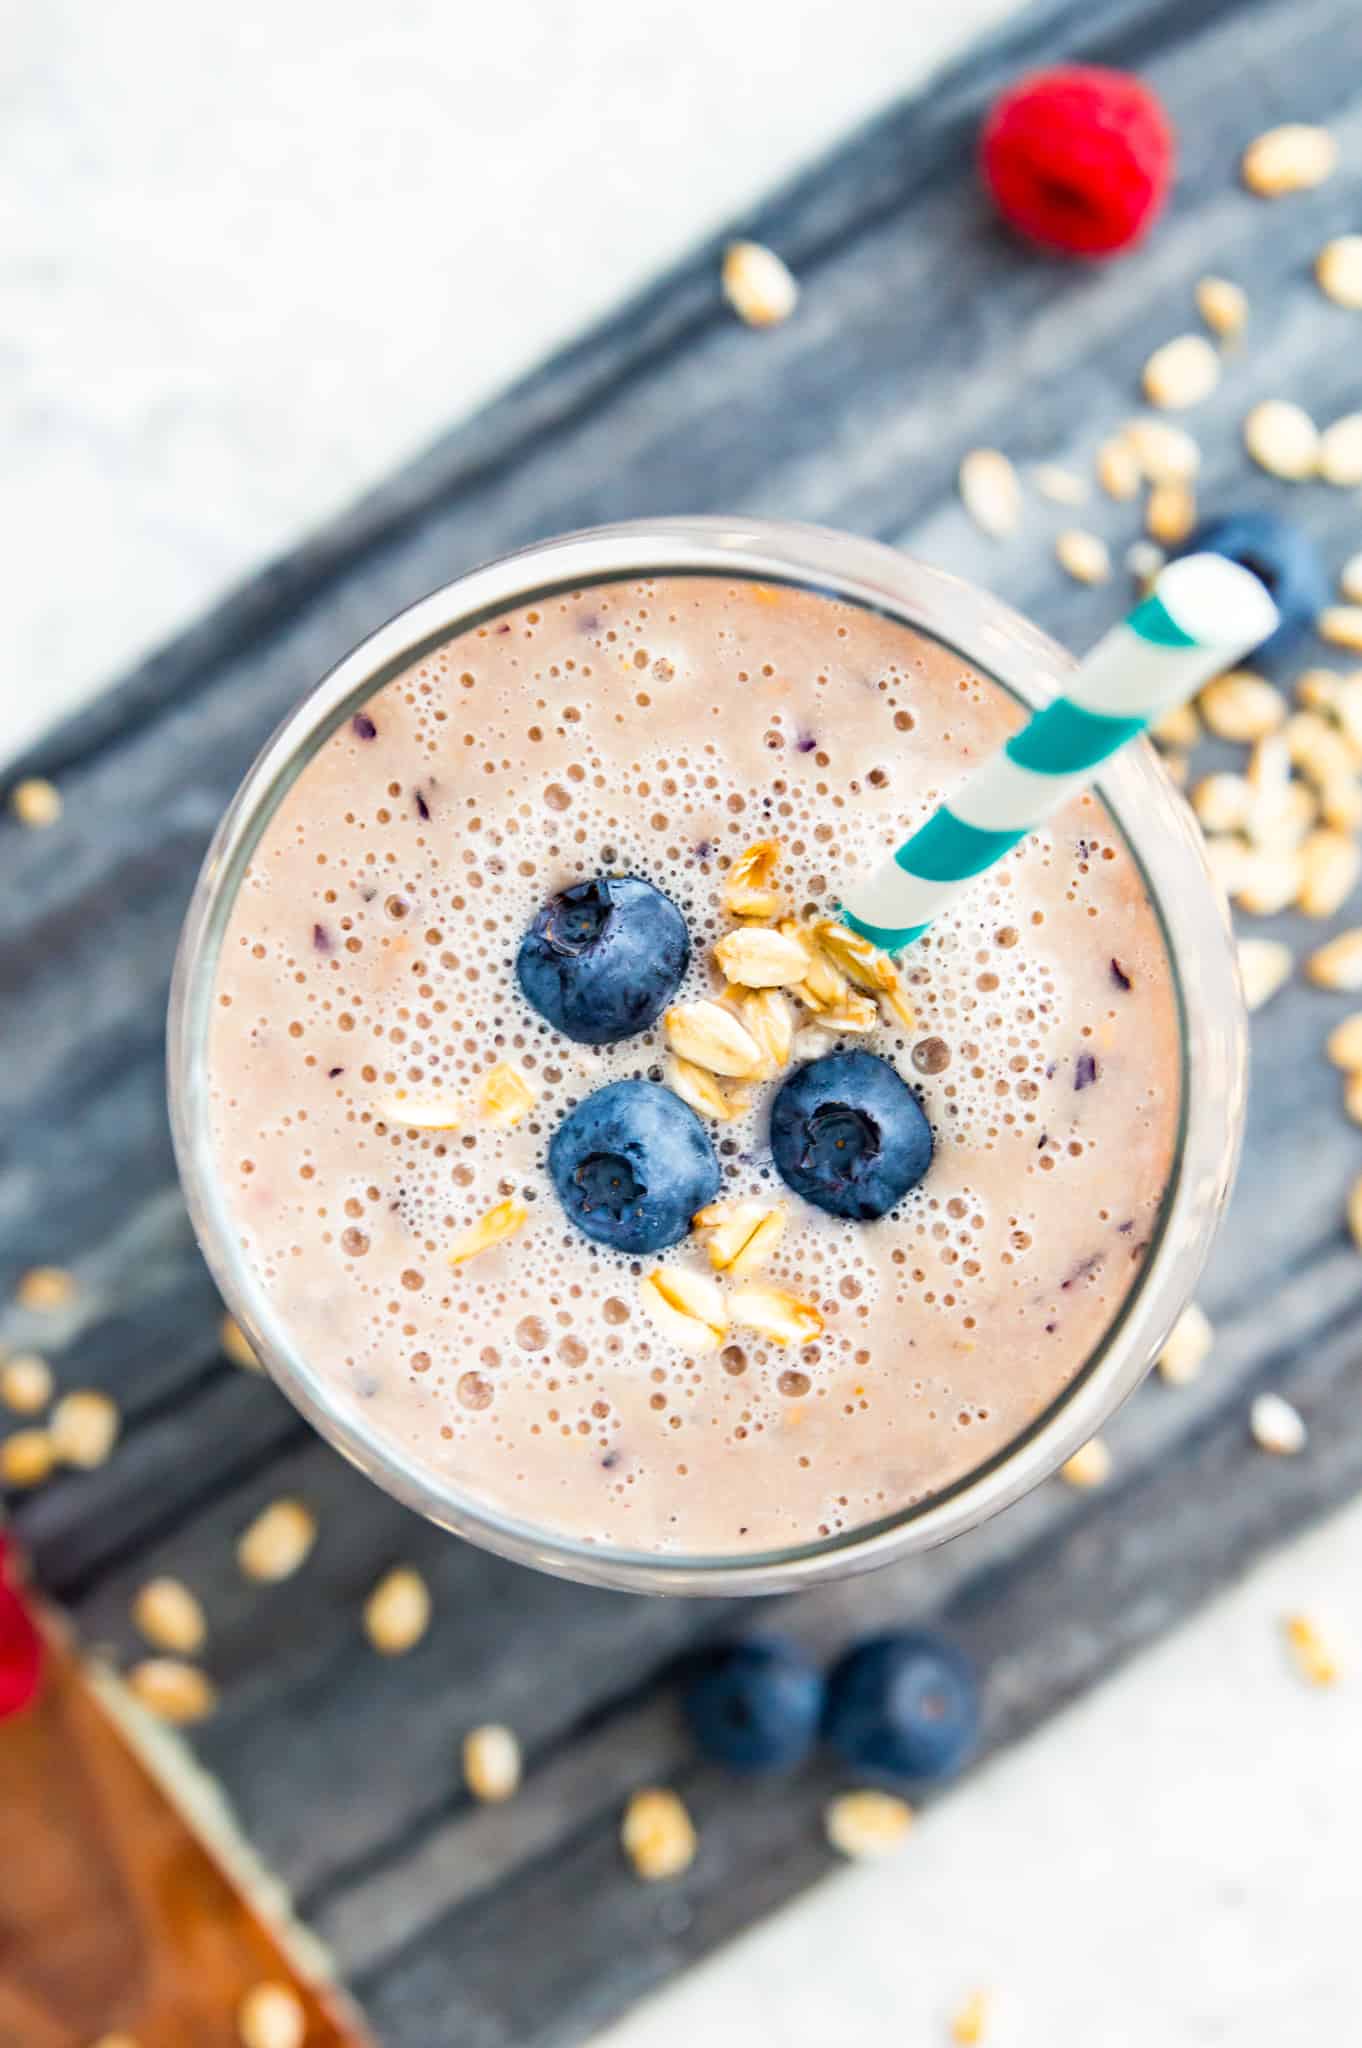 A glass full of an oat milk smoothie topped with fresh blueberries